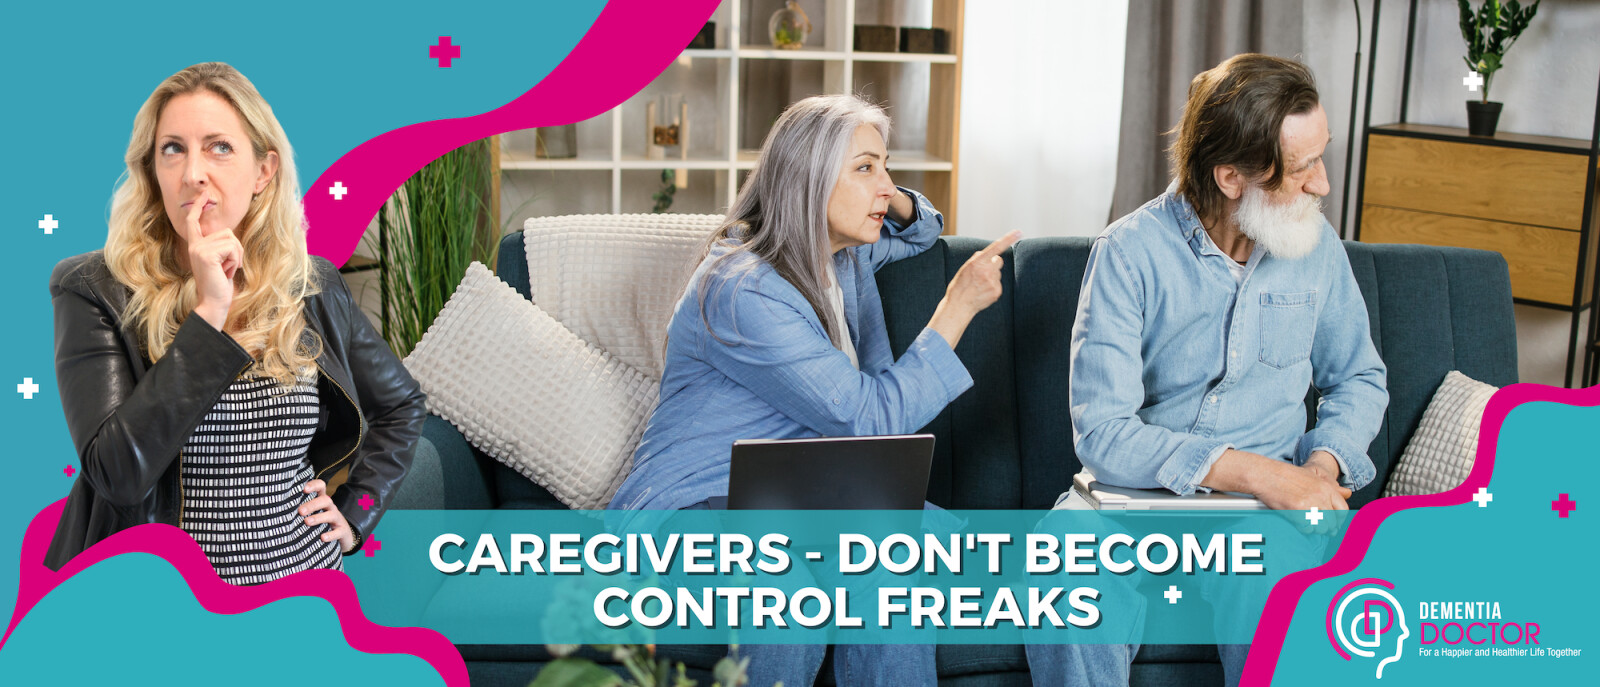 Caregivers - don't become control freaks